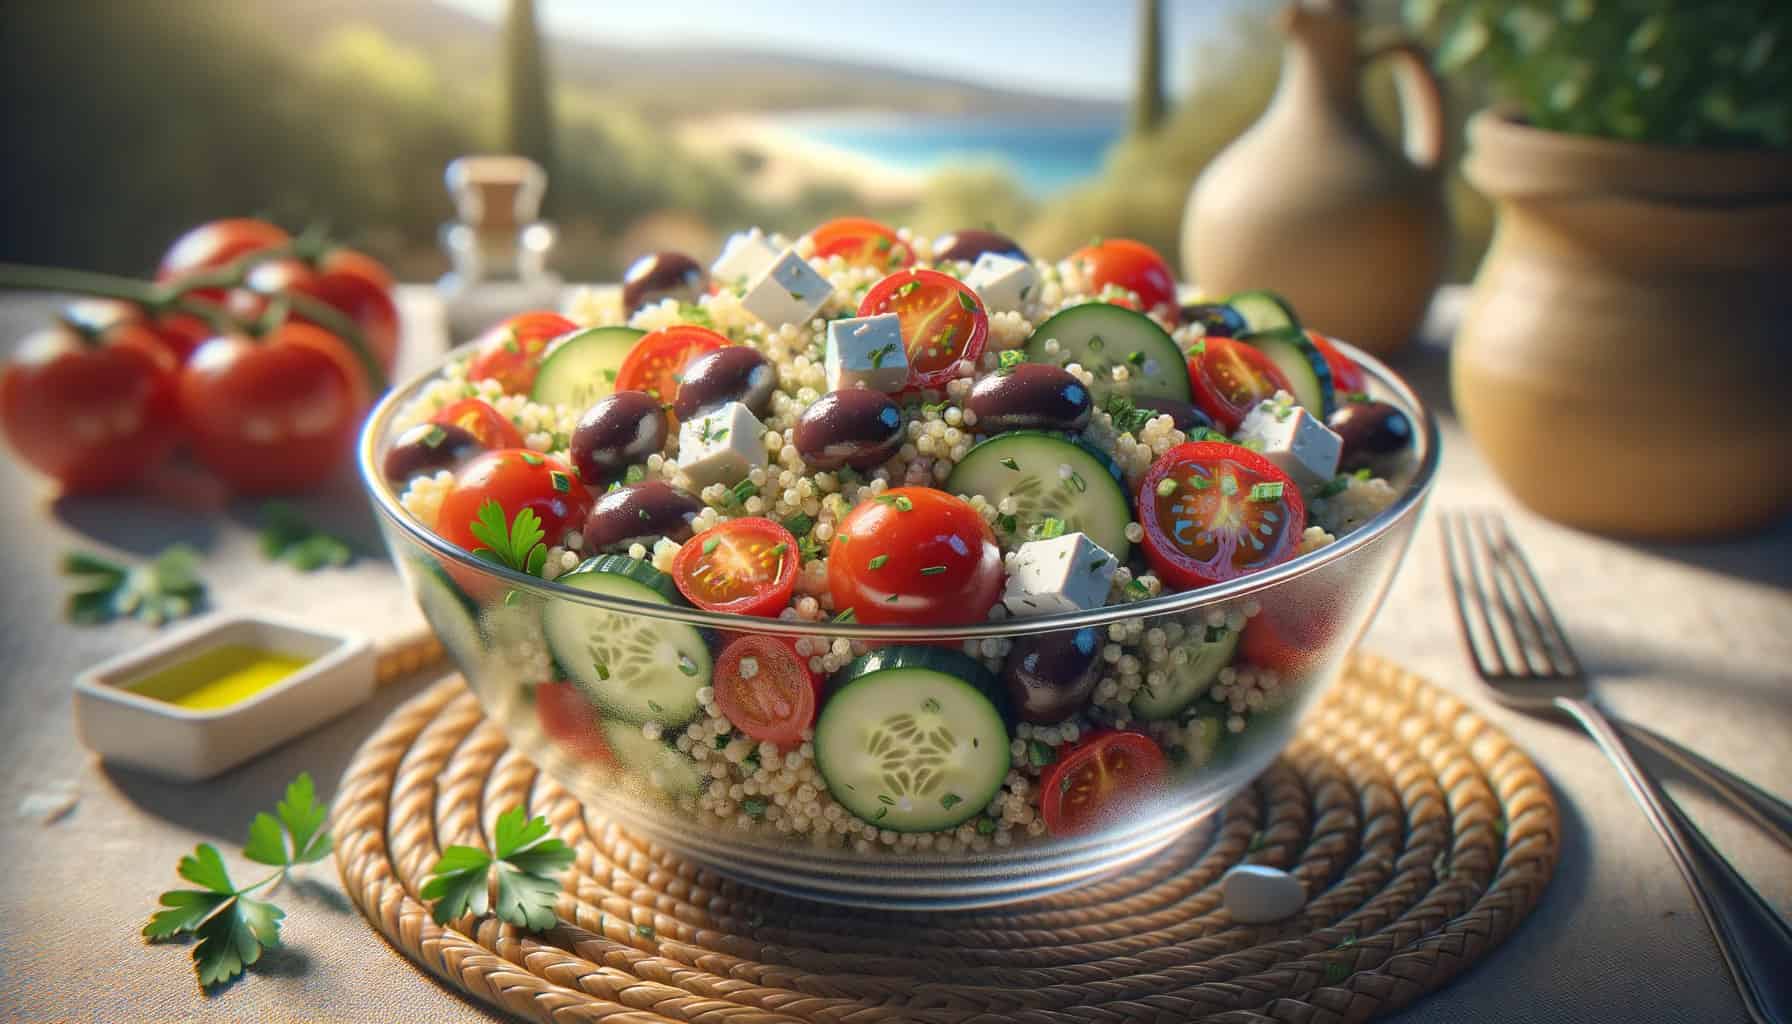 Mediterranean quinoa salad. A clear glass bowl contains fluffy cooked quinoa mixed with diced cucumbers, cherry tomatoes, kalamata olives, and red bell peppers. The salad is tossed in a zesty lemon-olive oil dressing and garnished with crumbled feta cheese and freshly chopped parsley.